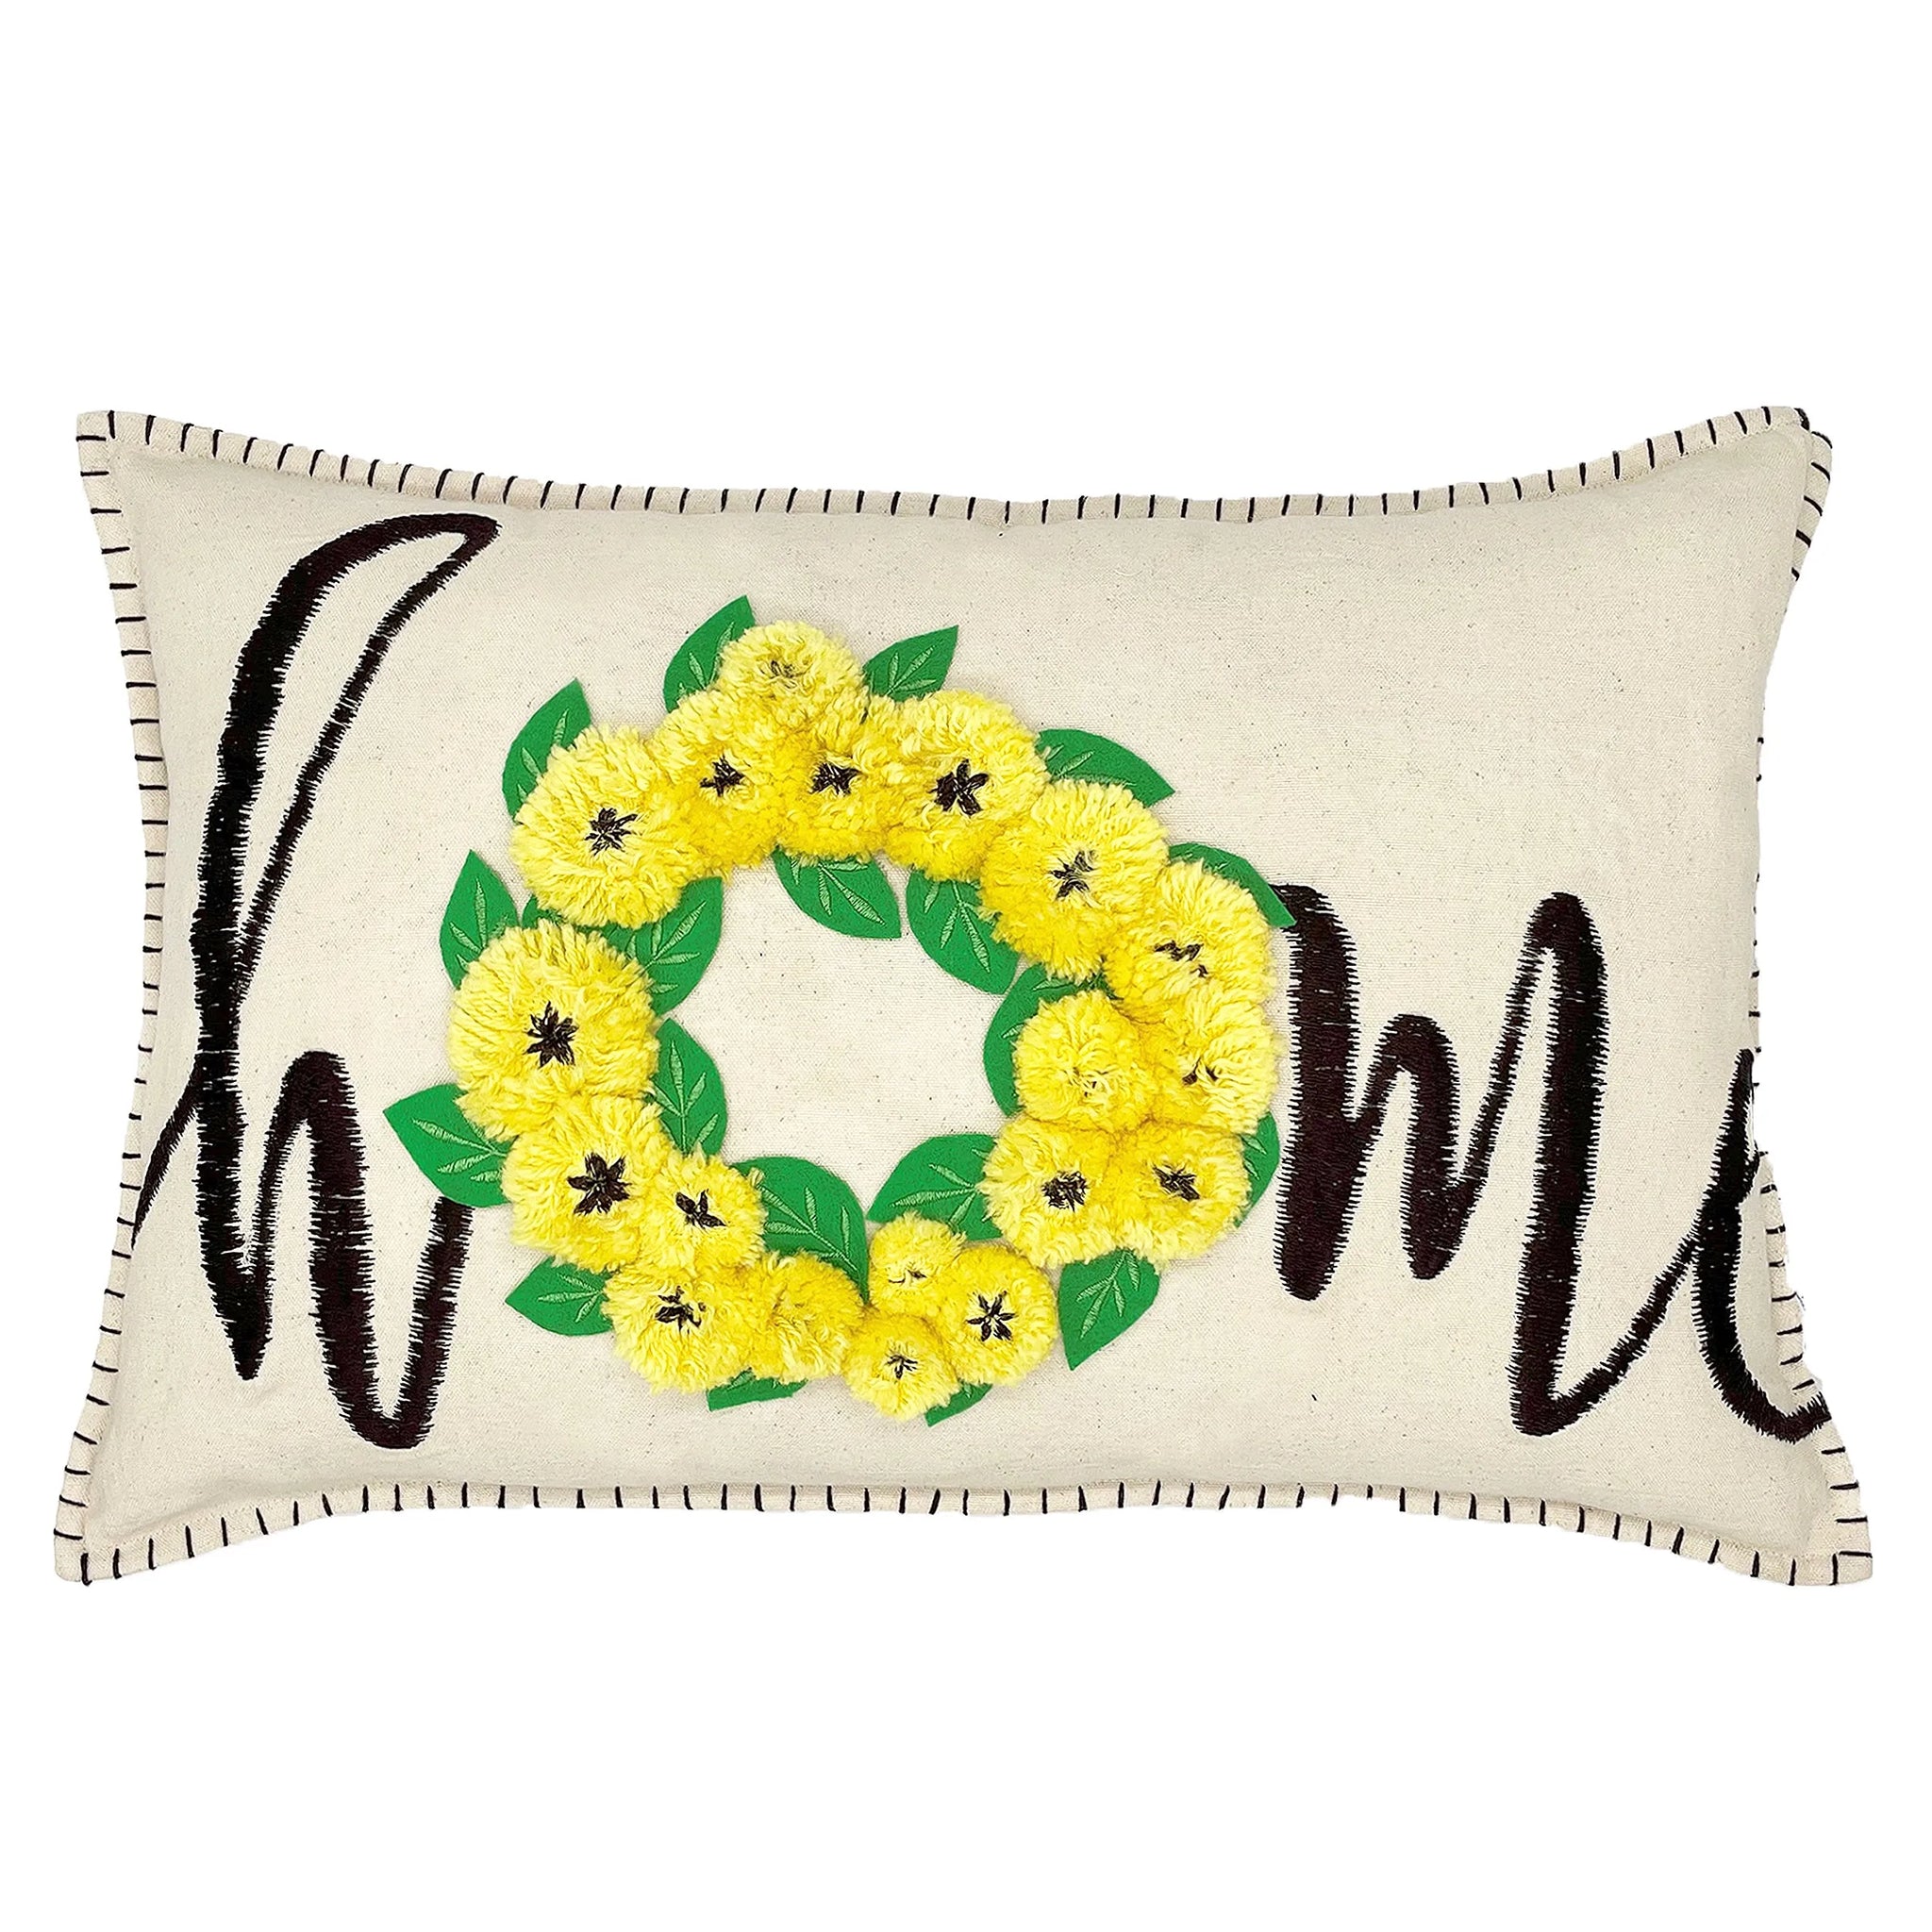 14"x22" Home Harvest Embroidery Lumbar Pillow home decor - Mod Lifestyles